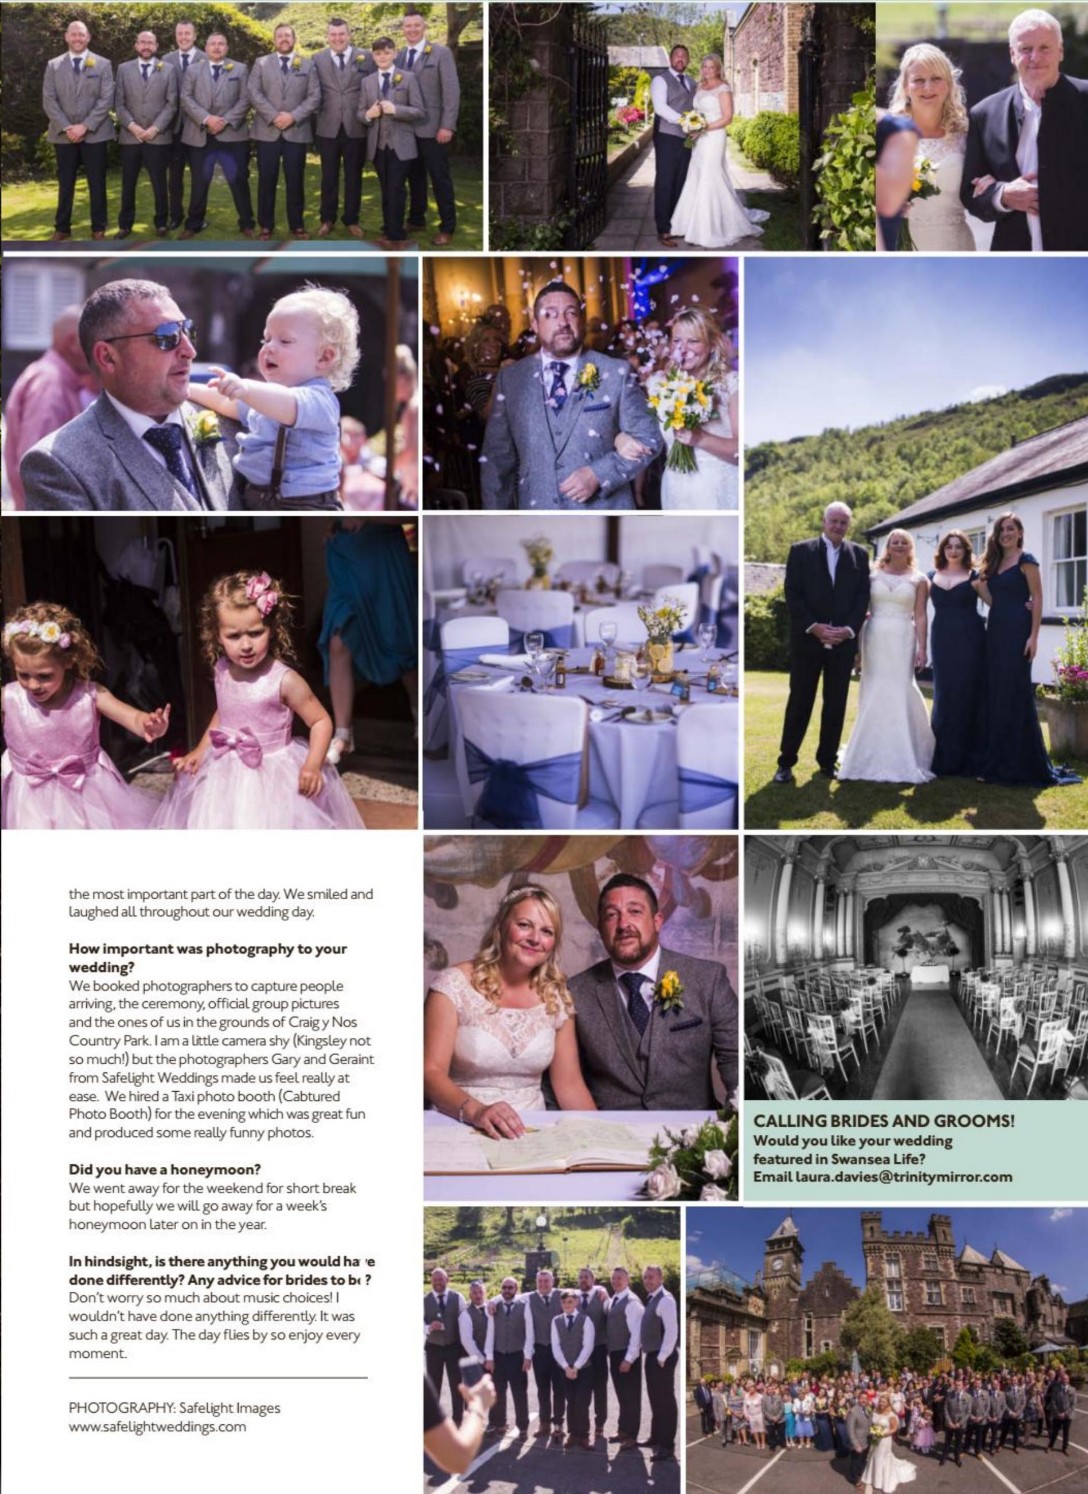 Swansea Life Magazine review of a wedding held at Craig y Nos Castle